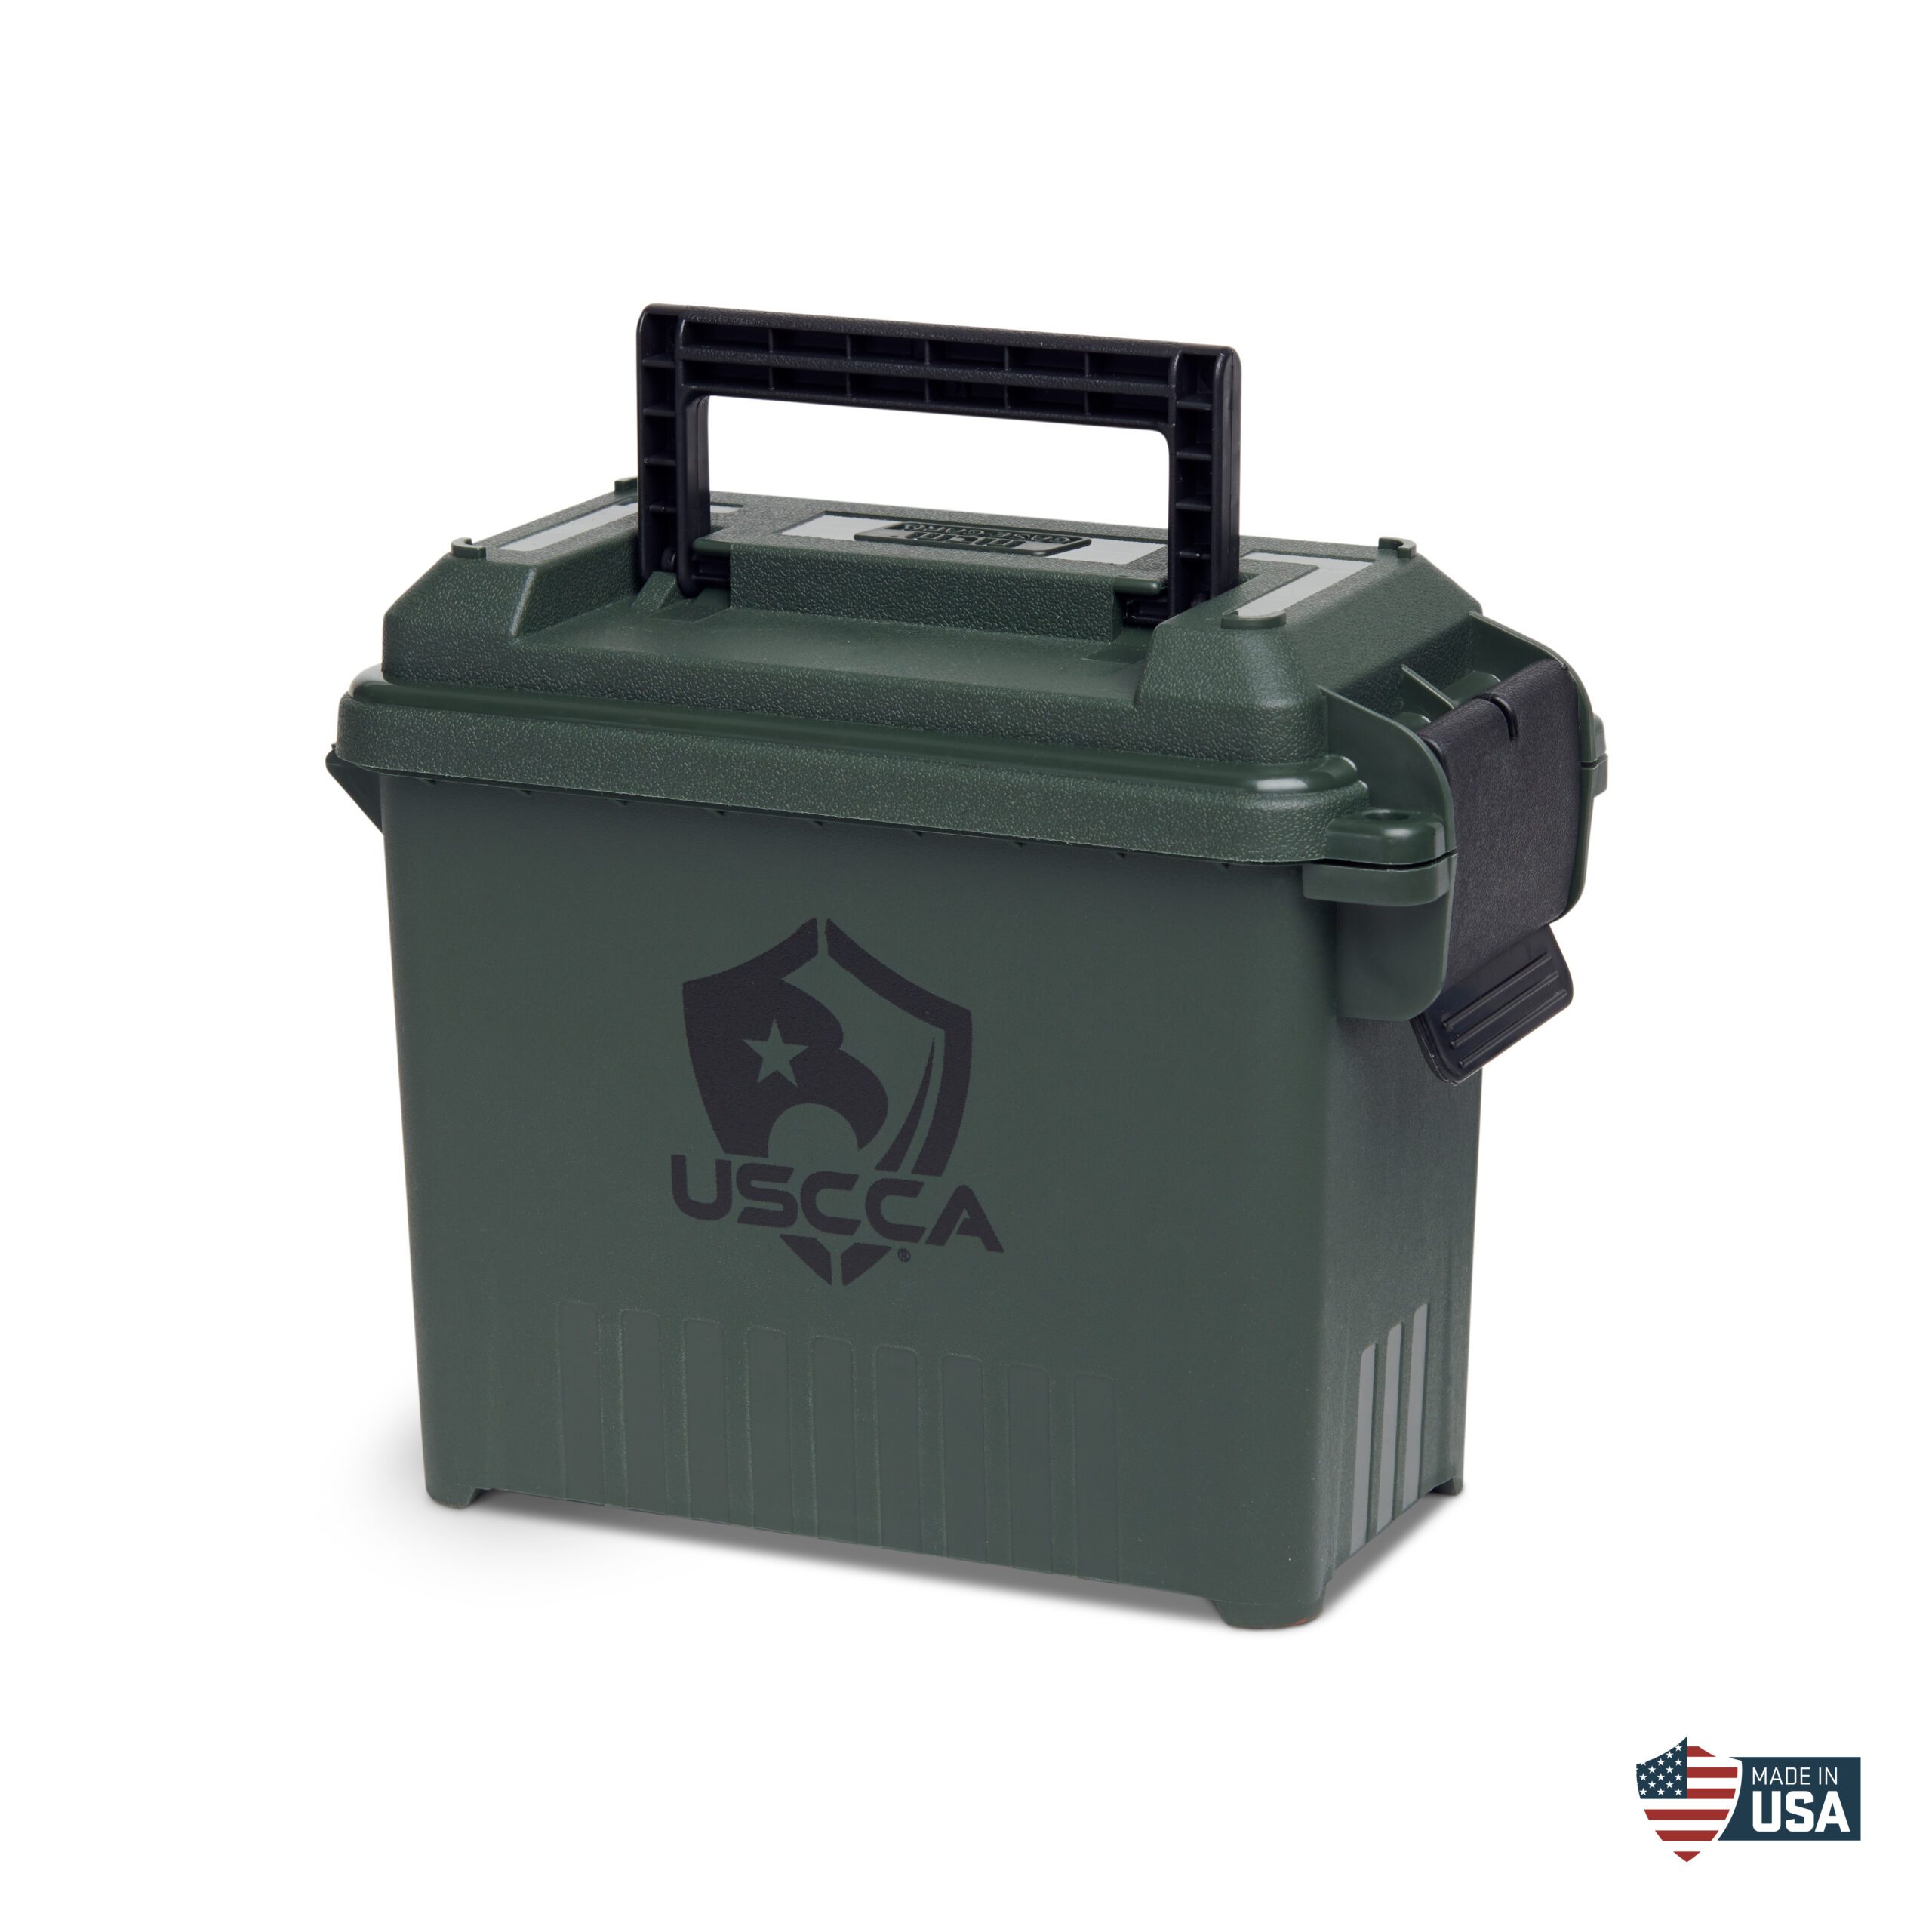 USCCA Ammo Can - USCCA Store